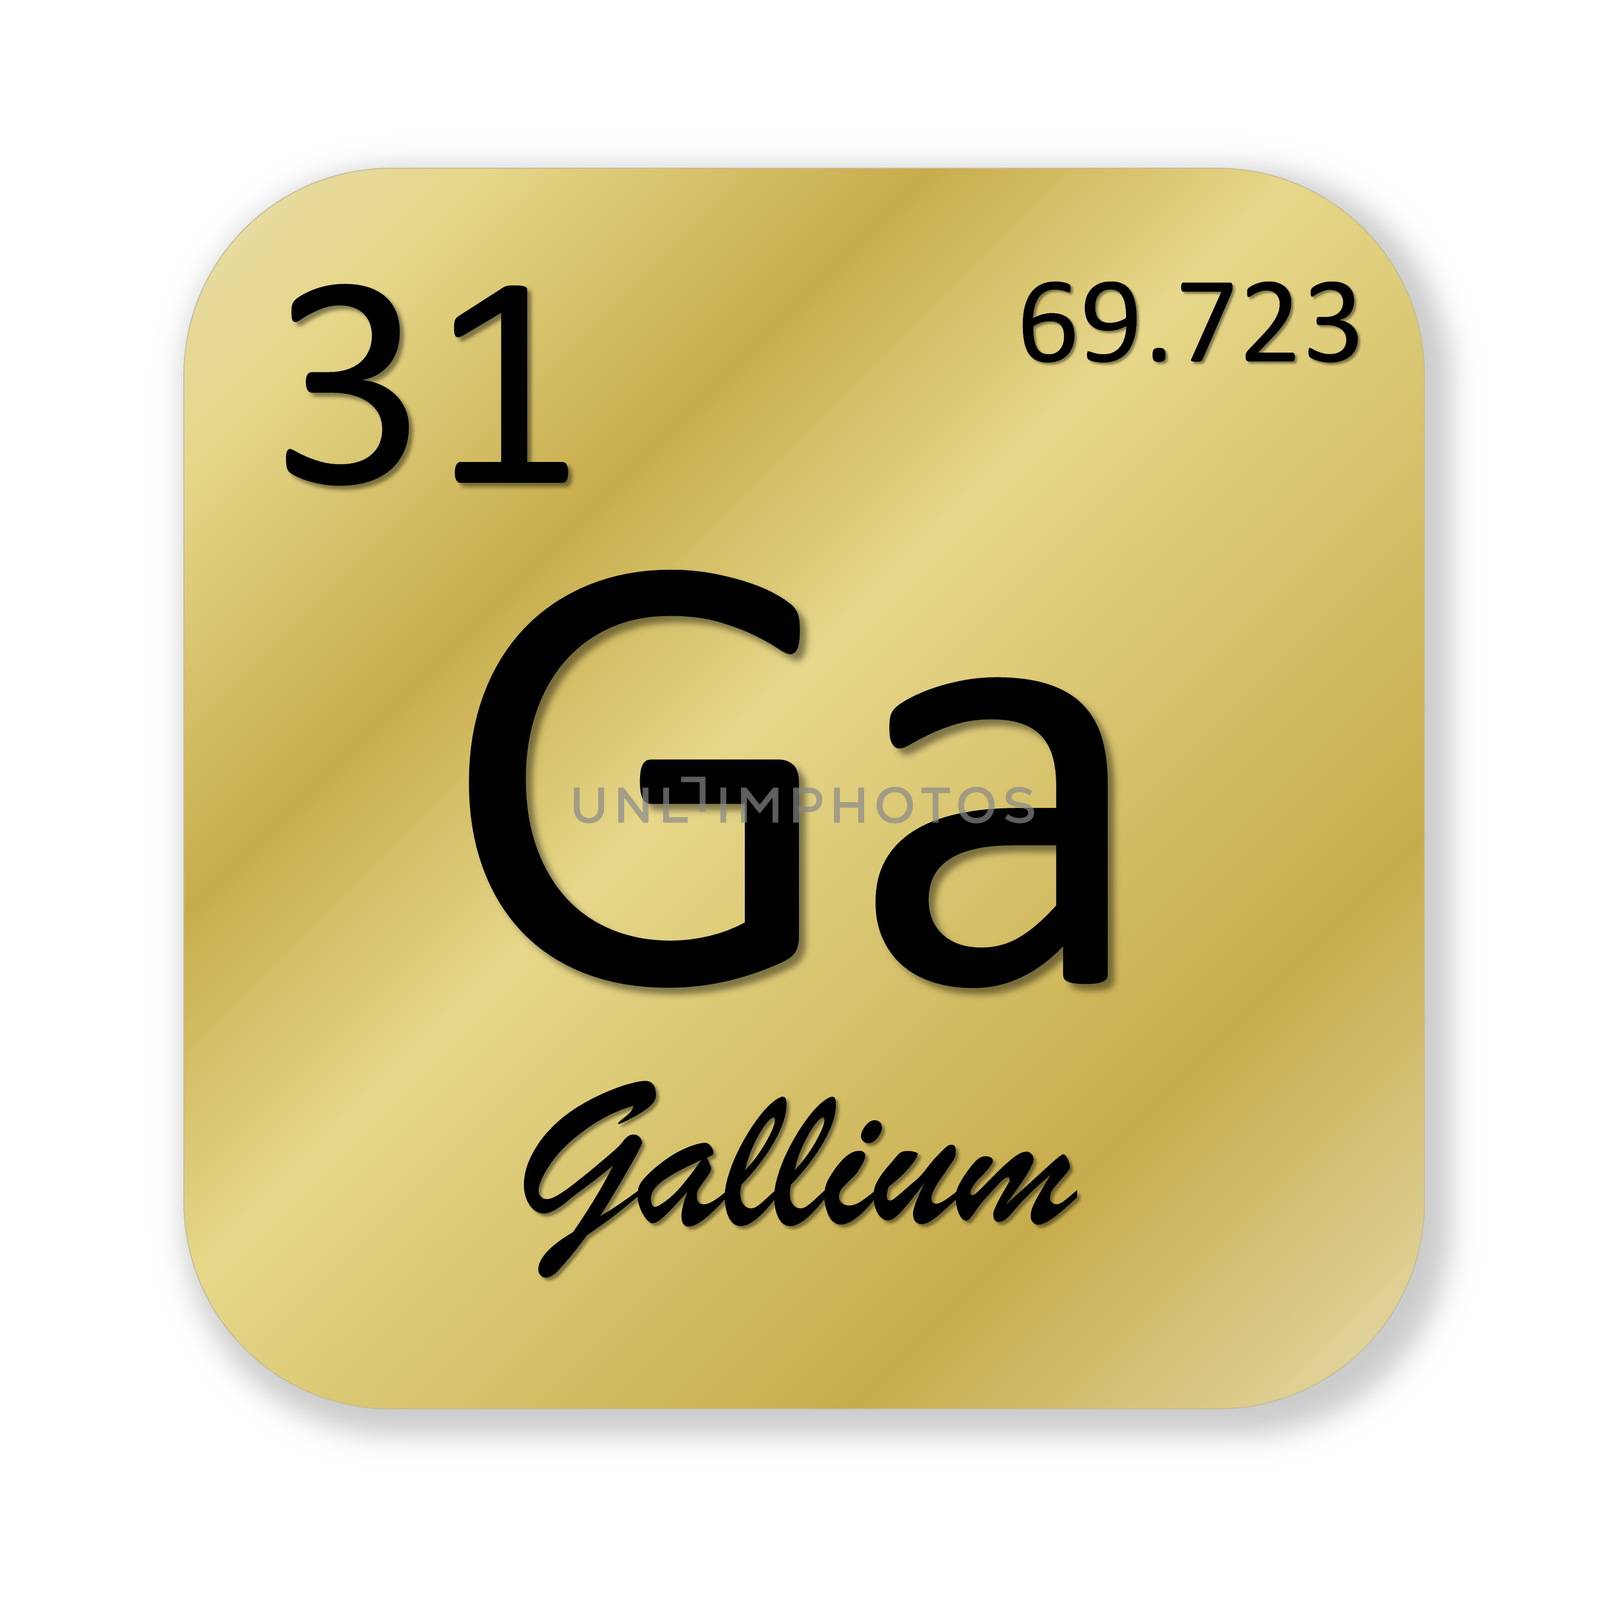 Black gallium element into golden square shape isolated in white background